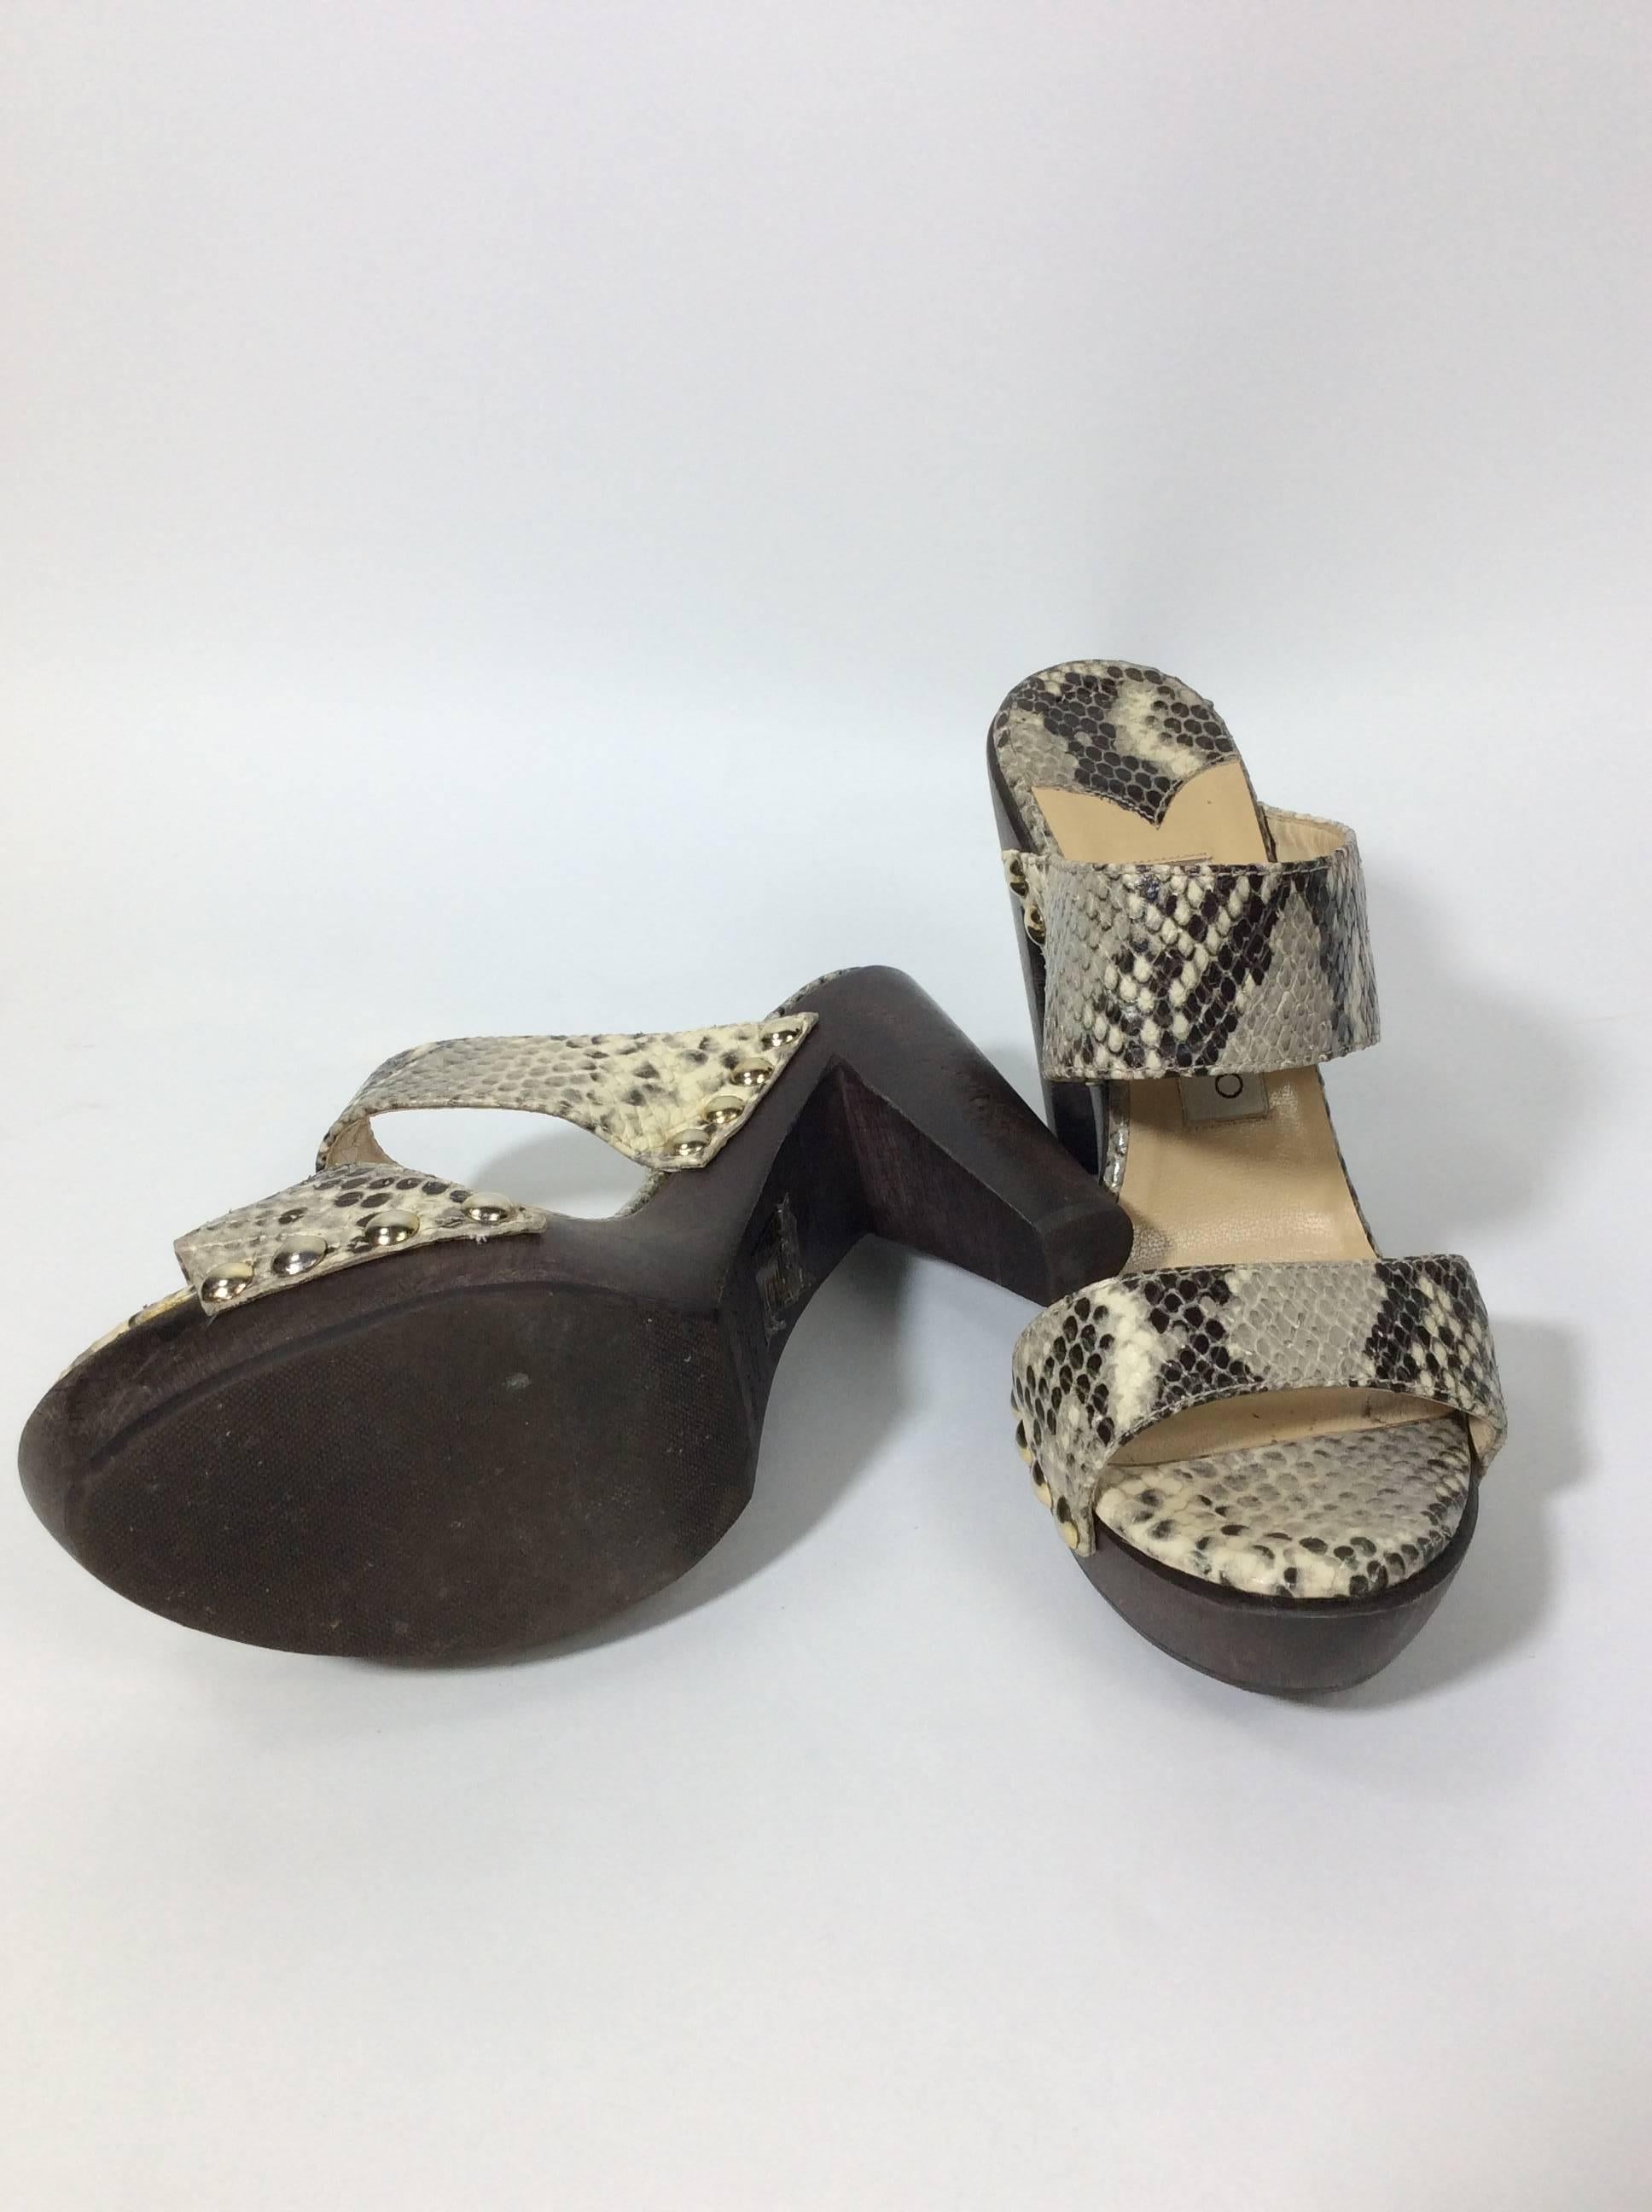 Jimmy Choo Grey and Brown Snakeskin Slides In Excellent Condition For Sale In Narberth, PA